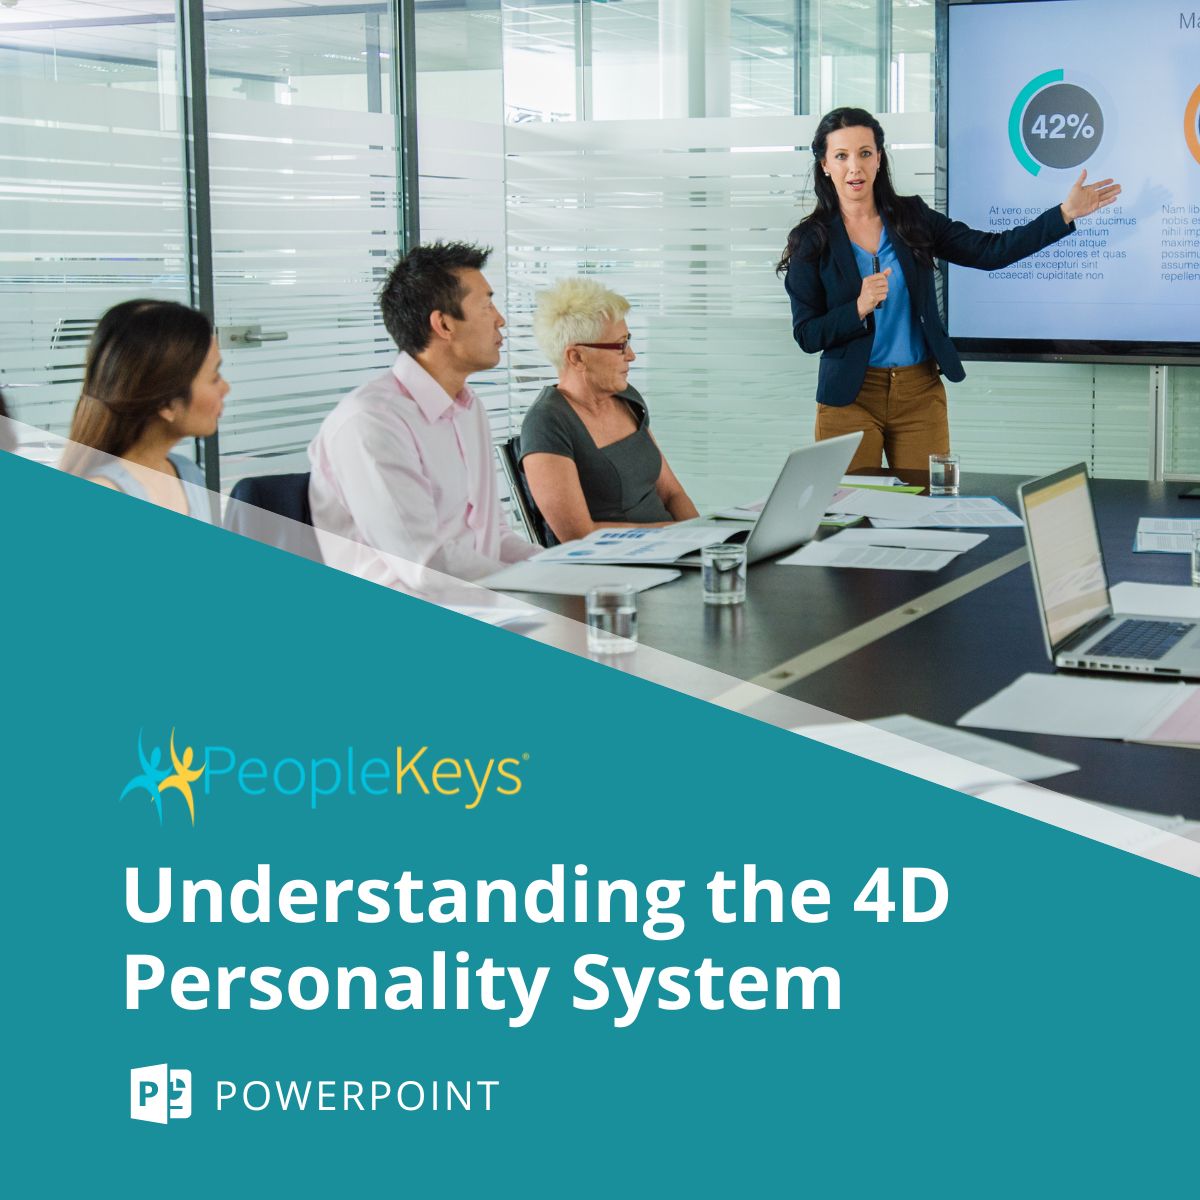 PowerPoint: Understanding the 4D Personality System (Download)